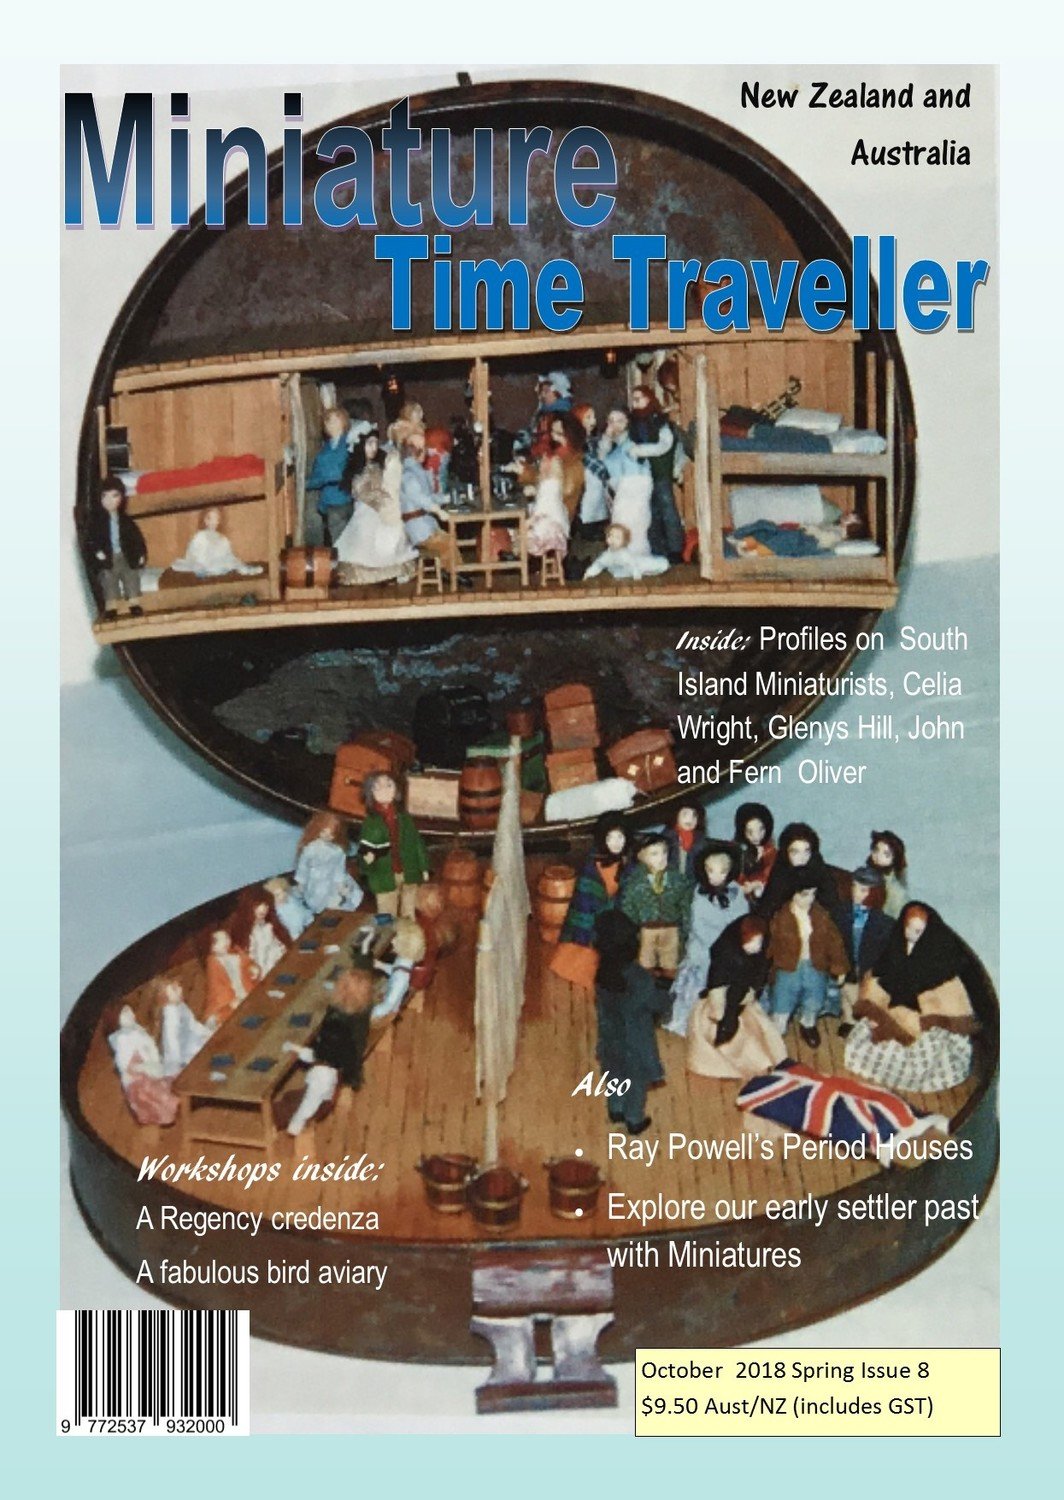 October 2018 Issue - Miniature Time Traveller Magazine - Single Issue only. Postage extra.